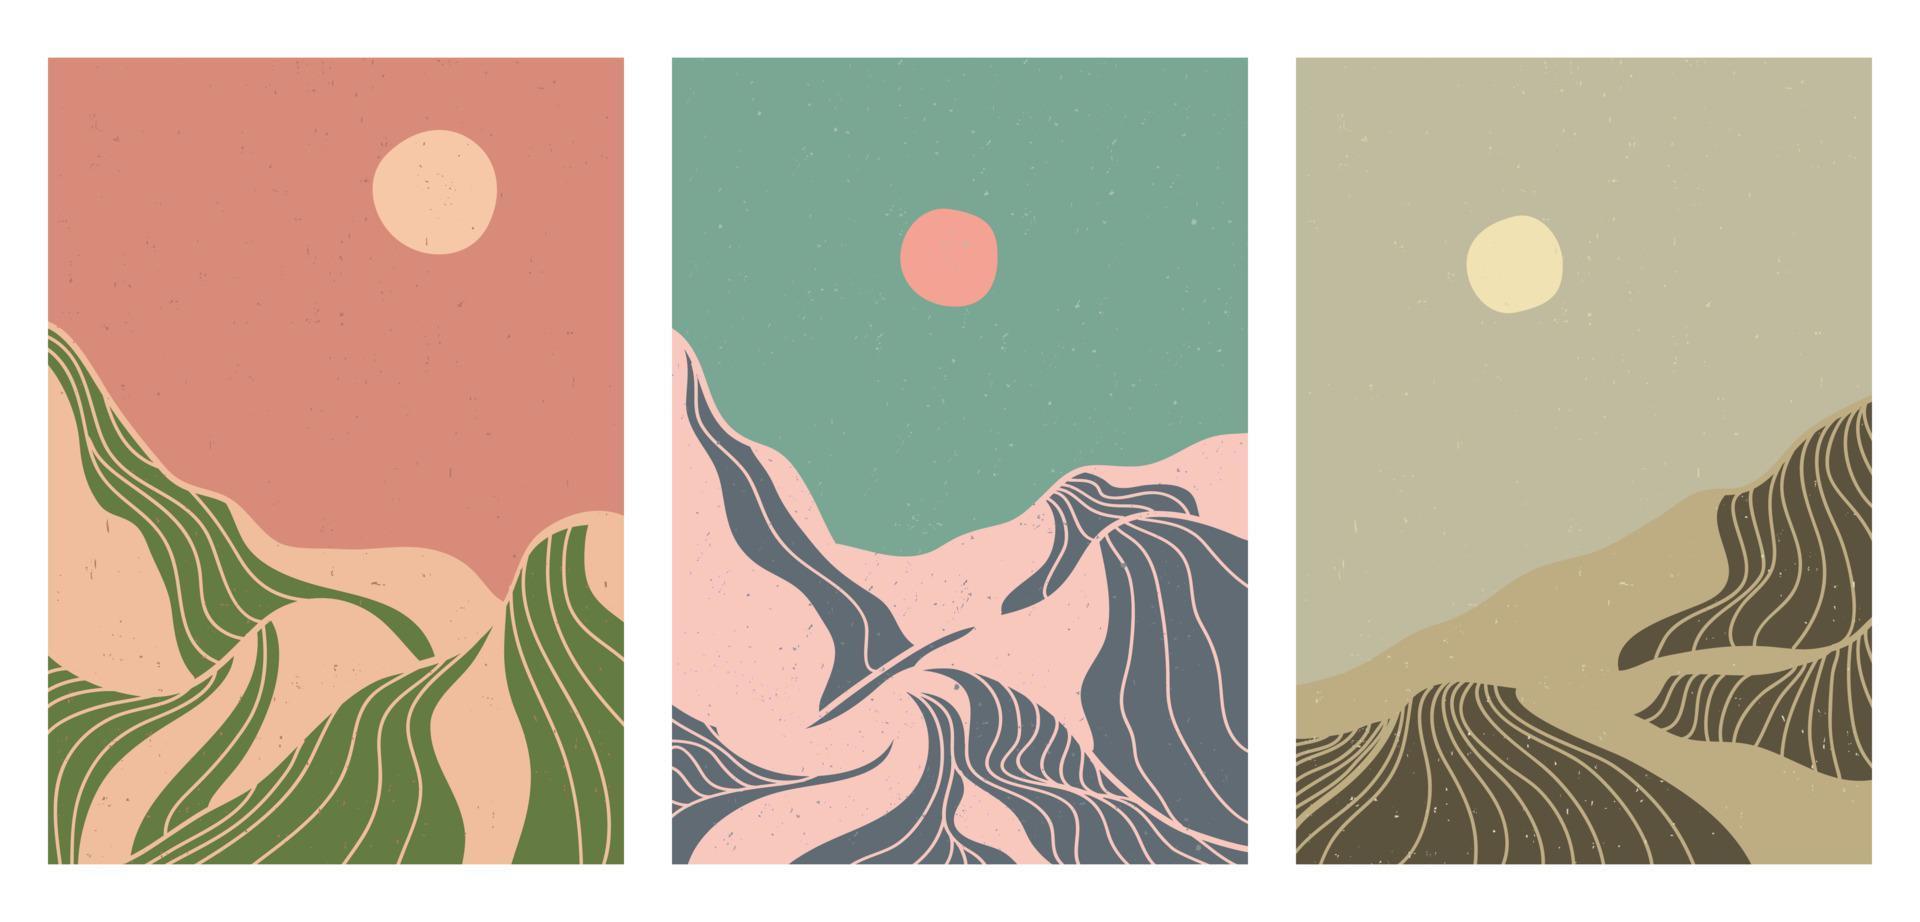 Mountain in vintage style. Mid century modern minimalist art print on set. Abstract contemporary aesthetic backgrounds landscapes. vector illustrations